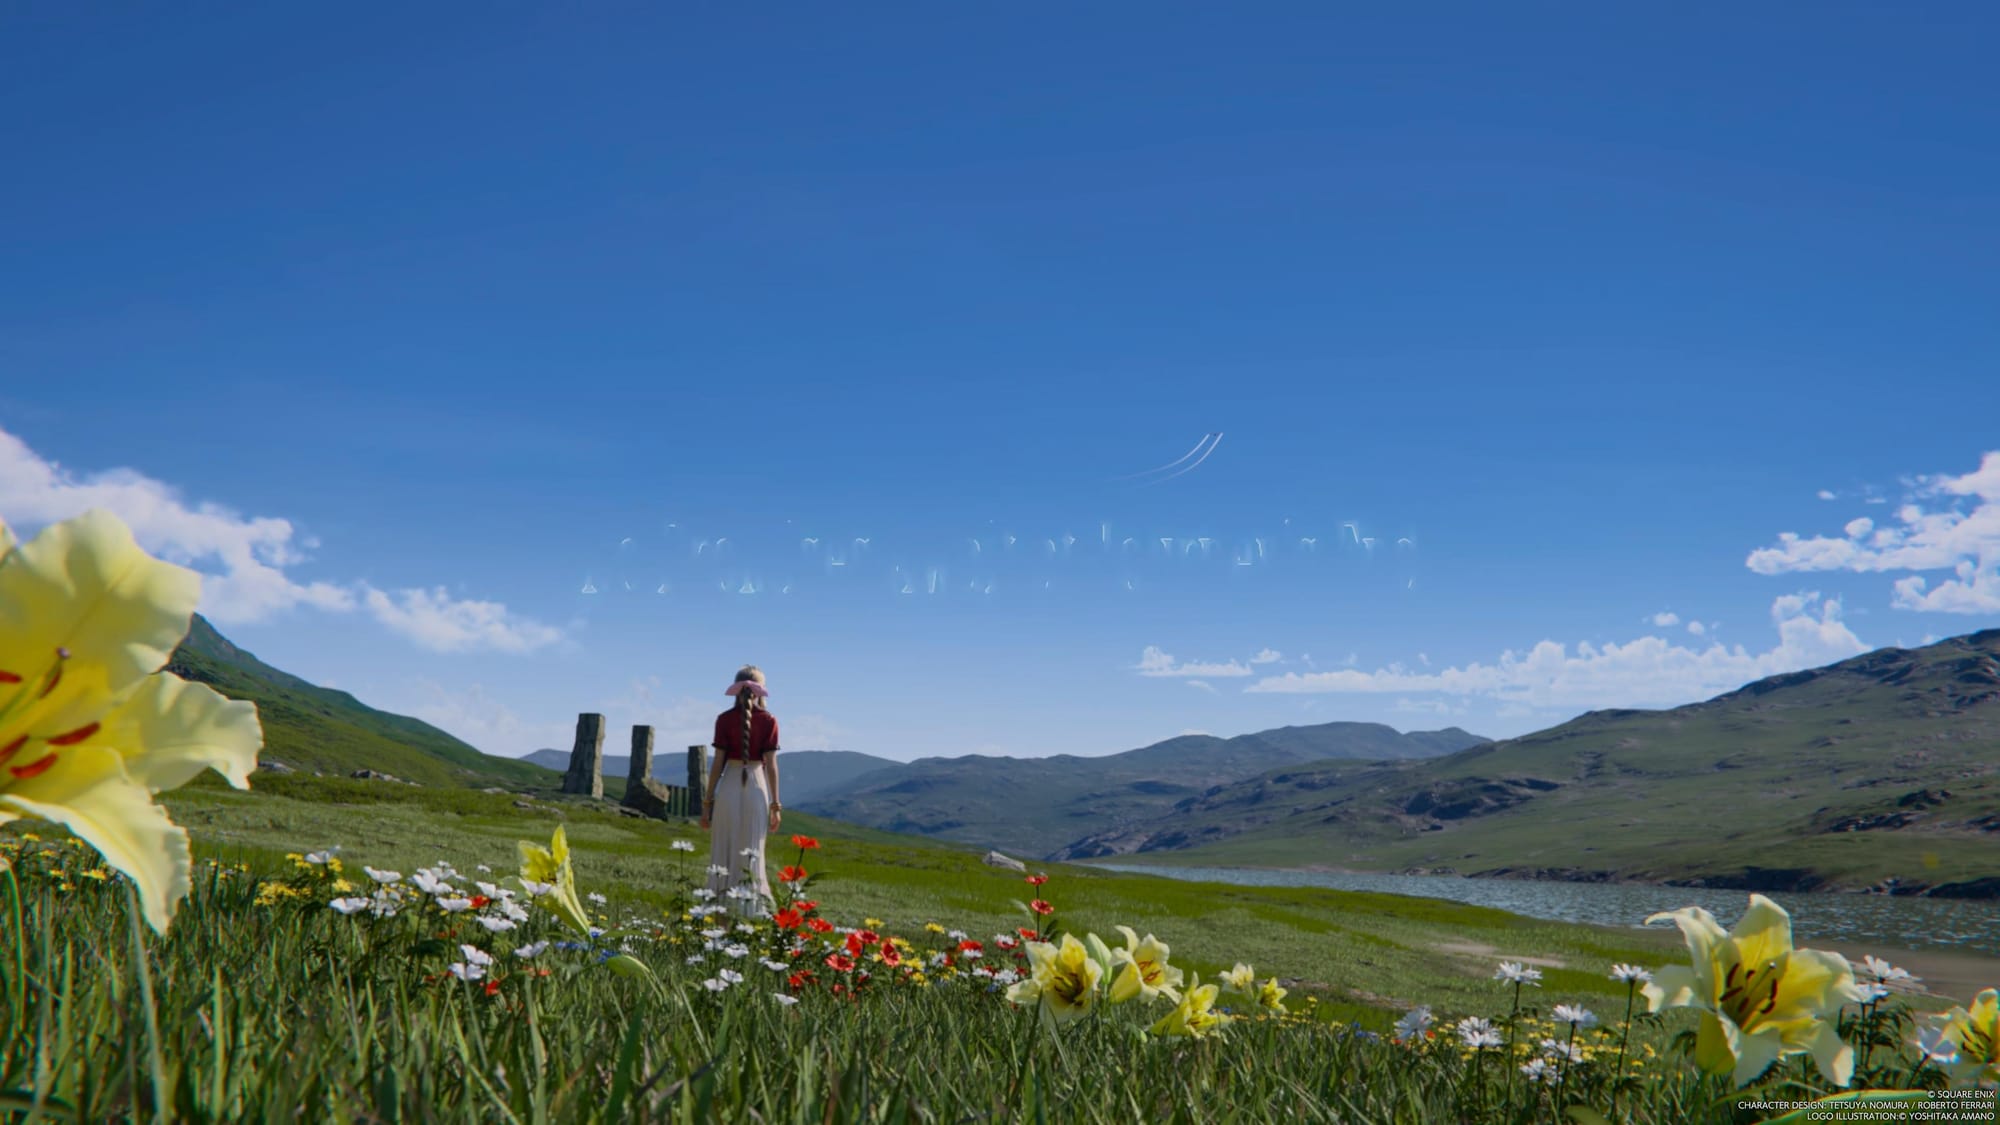 A screenshot from Final Fantasy VII Rebirth with Aerith standing in a verdant valley staring at a blue sky scattered with clouds.